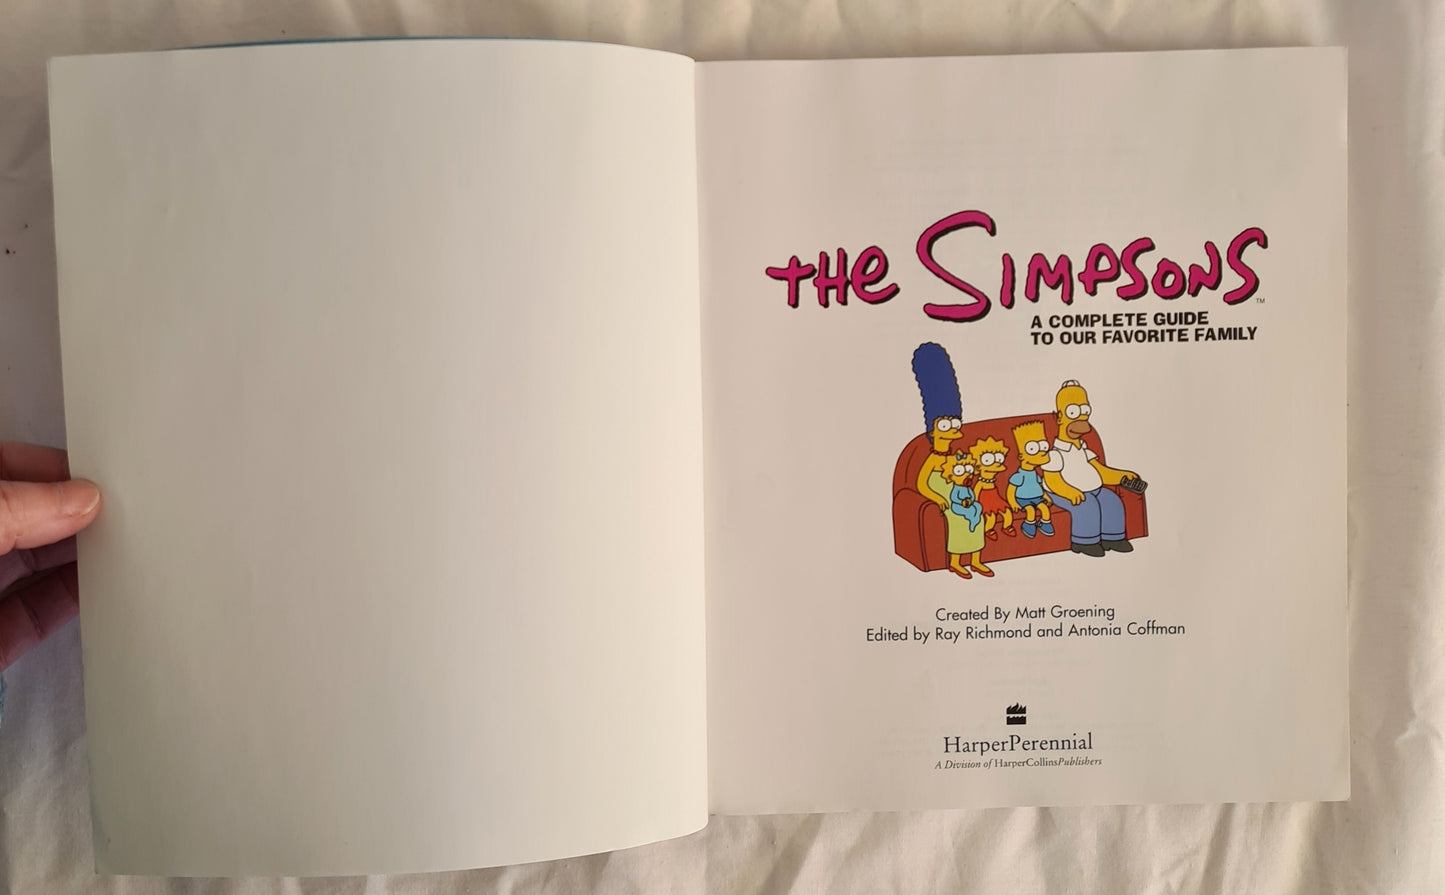 The Simpsons by Ray Richmond and Antonia Coffman